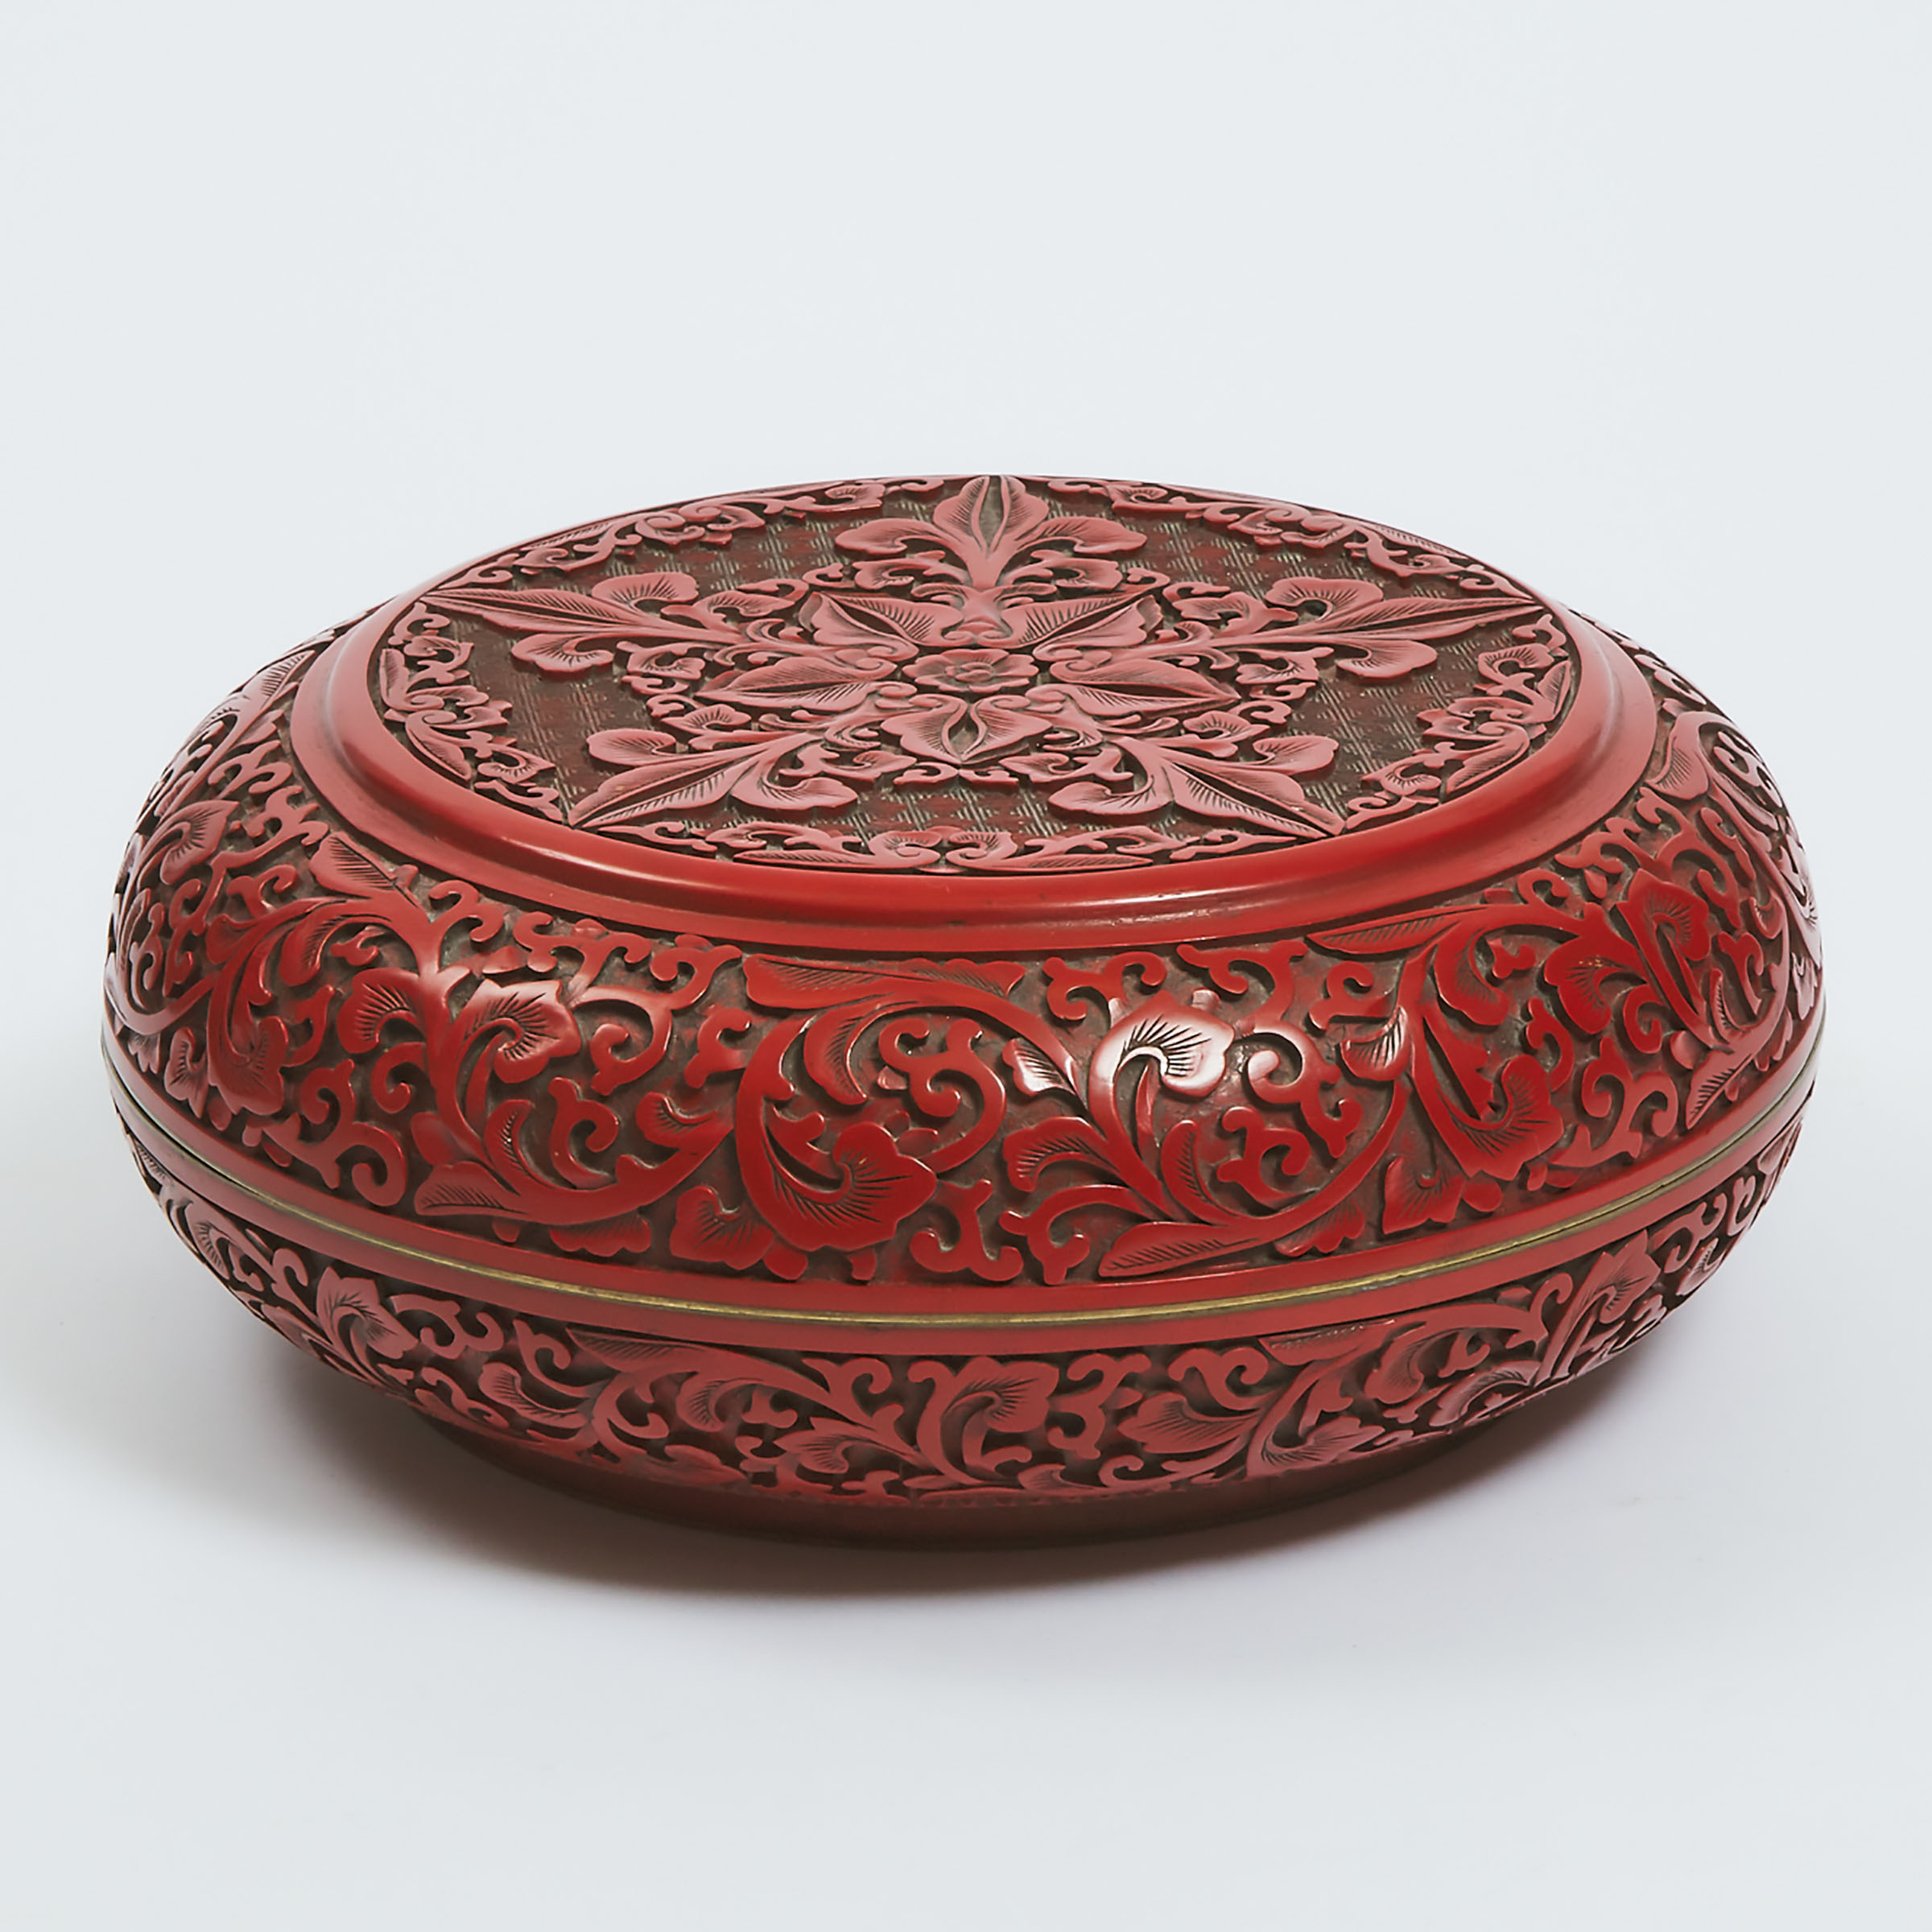 A Chinese Carved Lacquer Box, Mid-20th Century